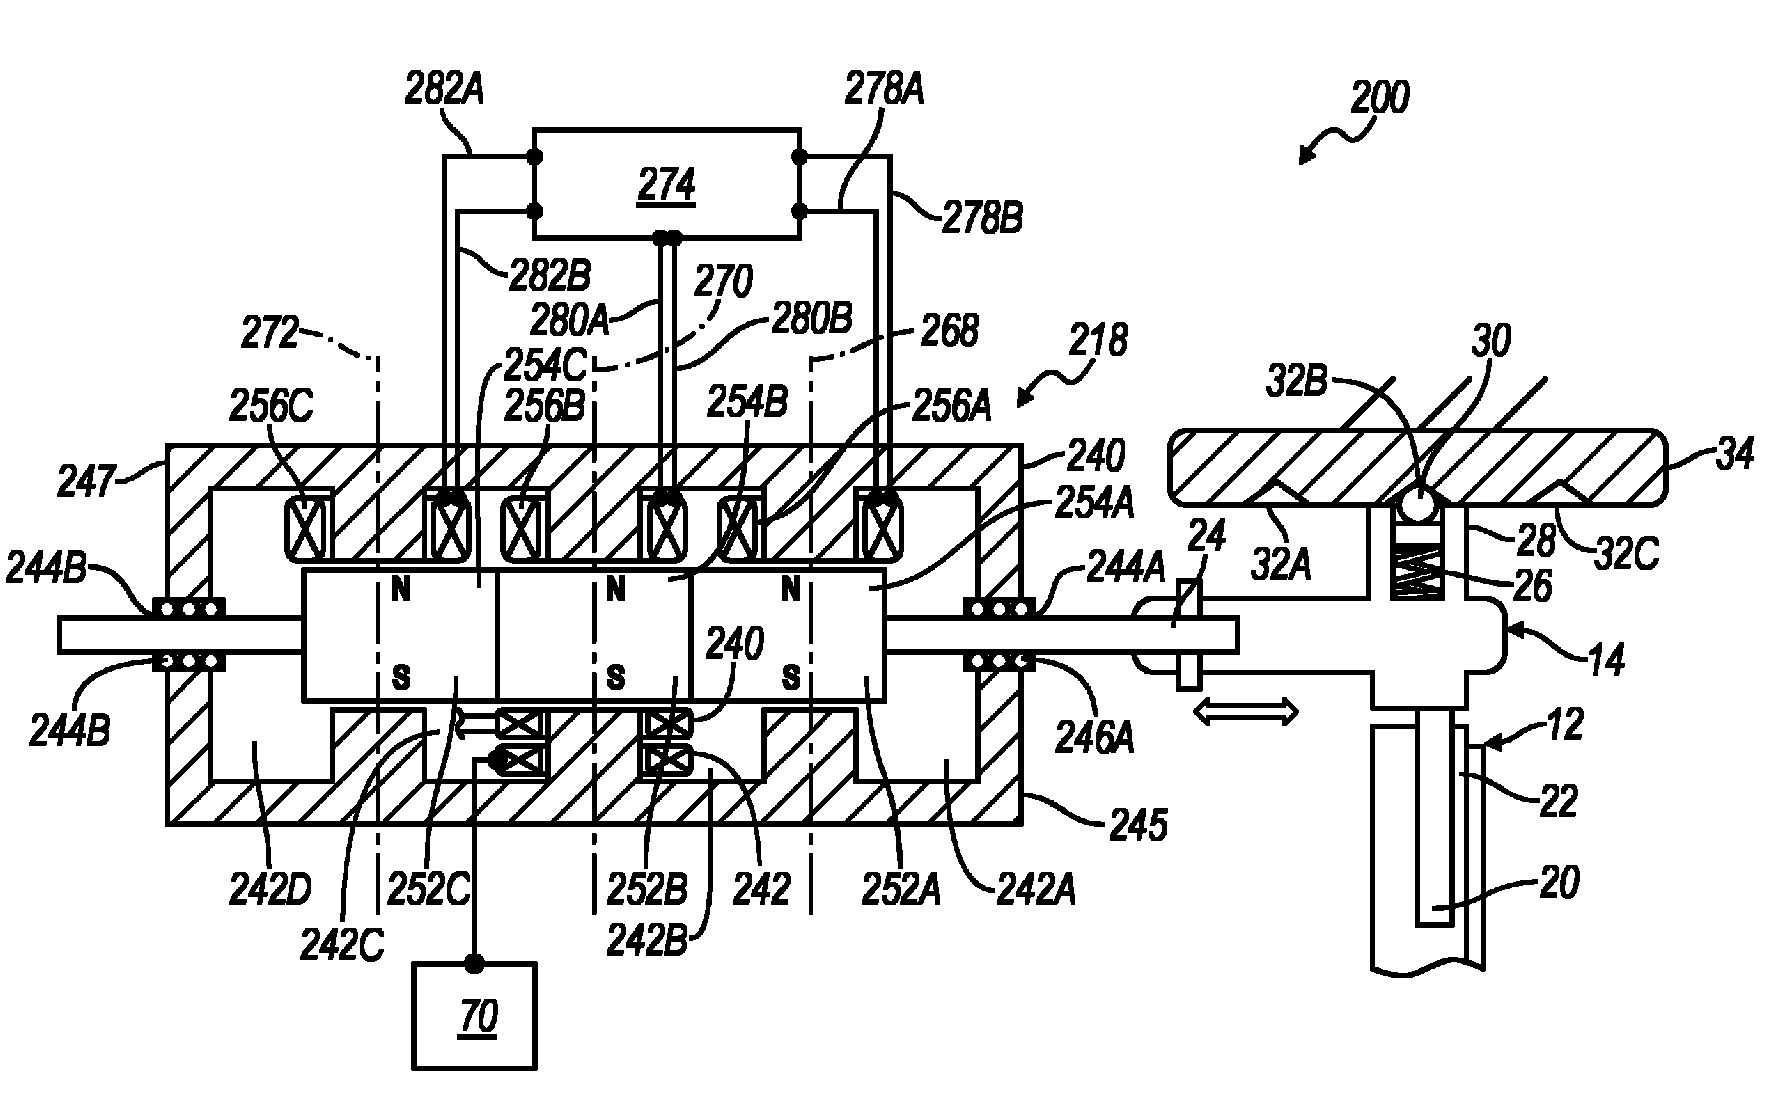 Electromagnetic synchronizer actuating system